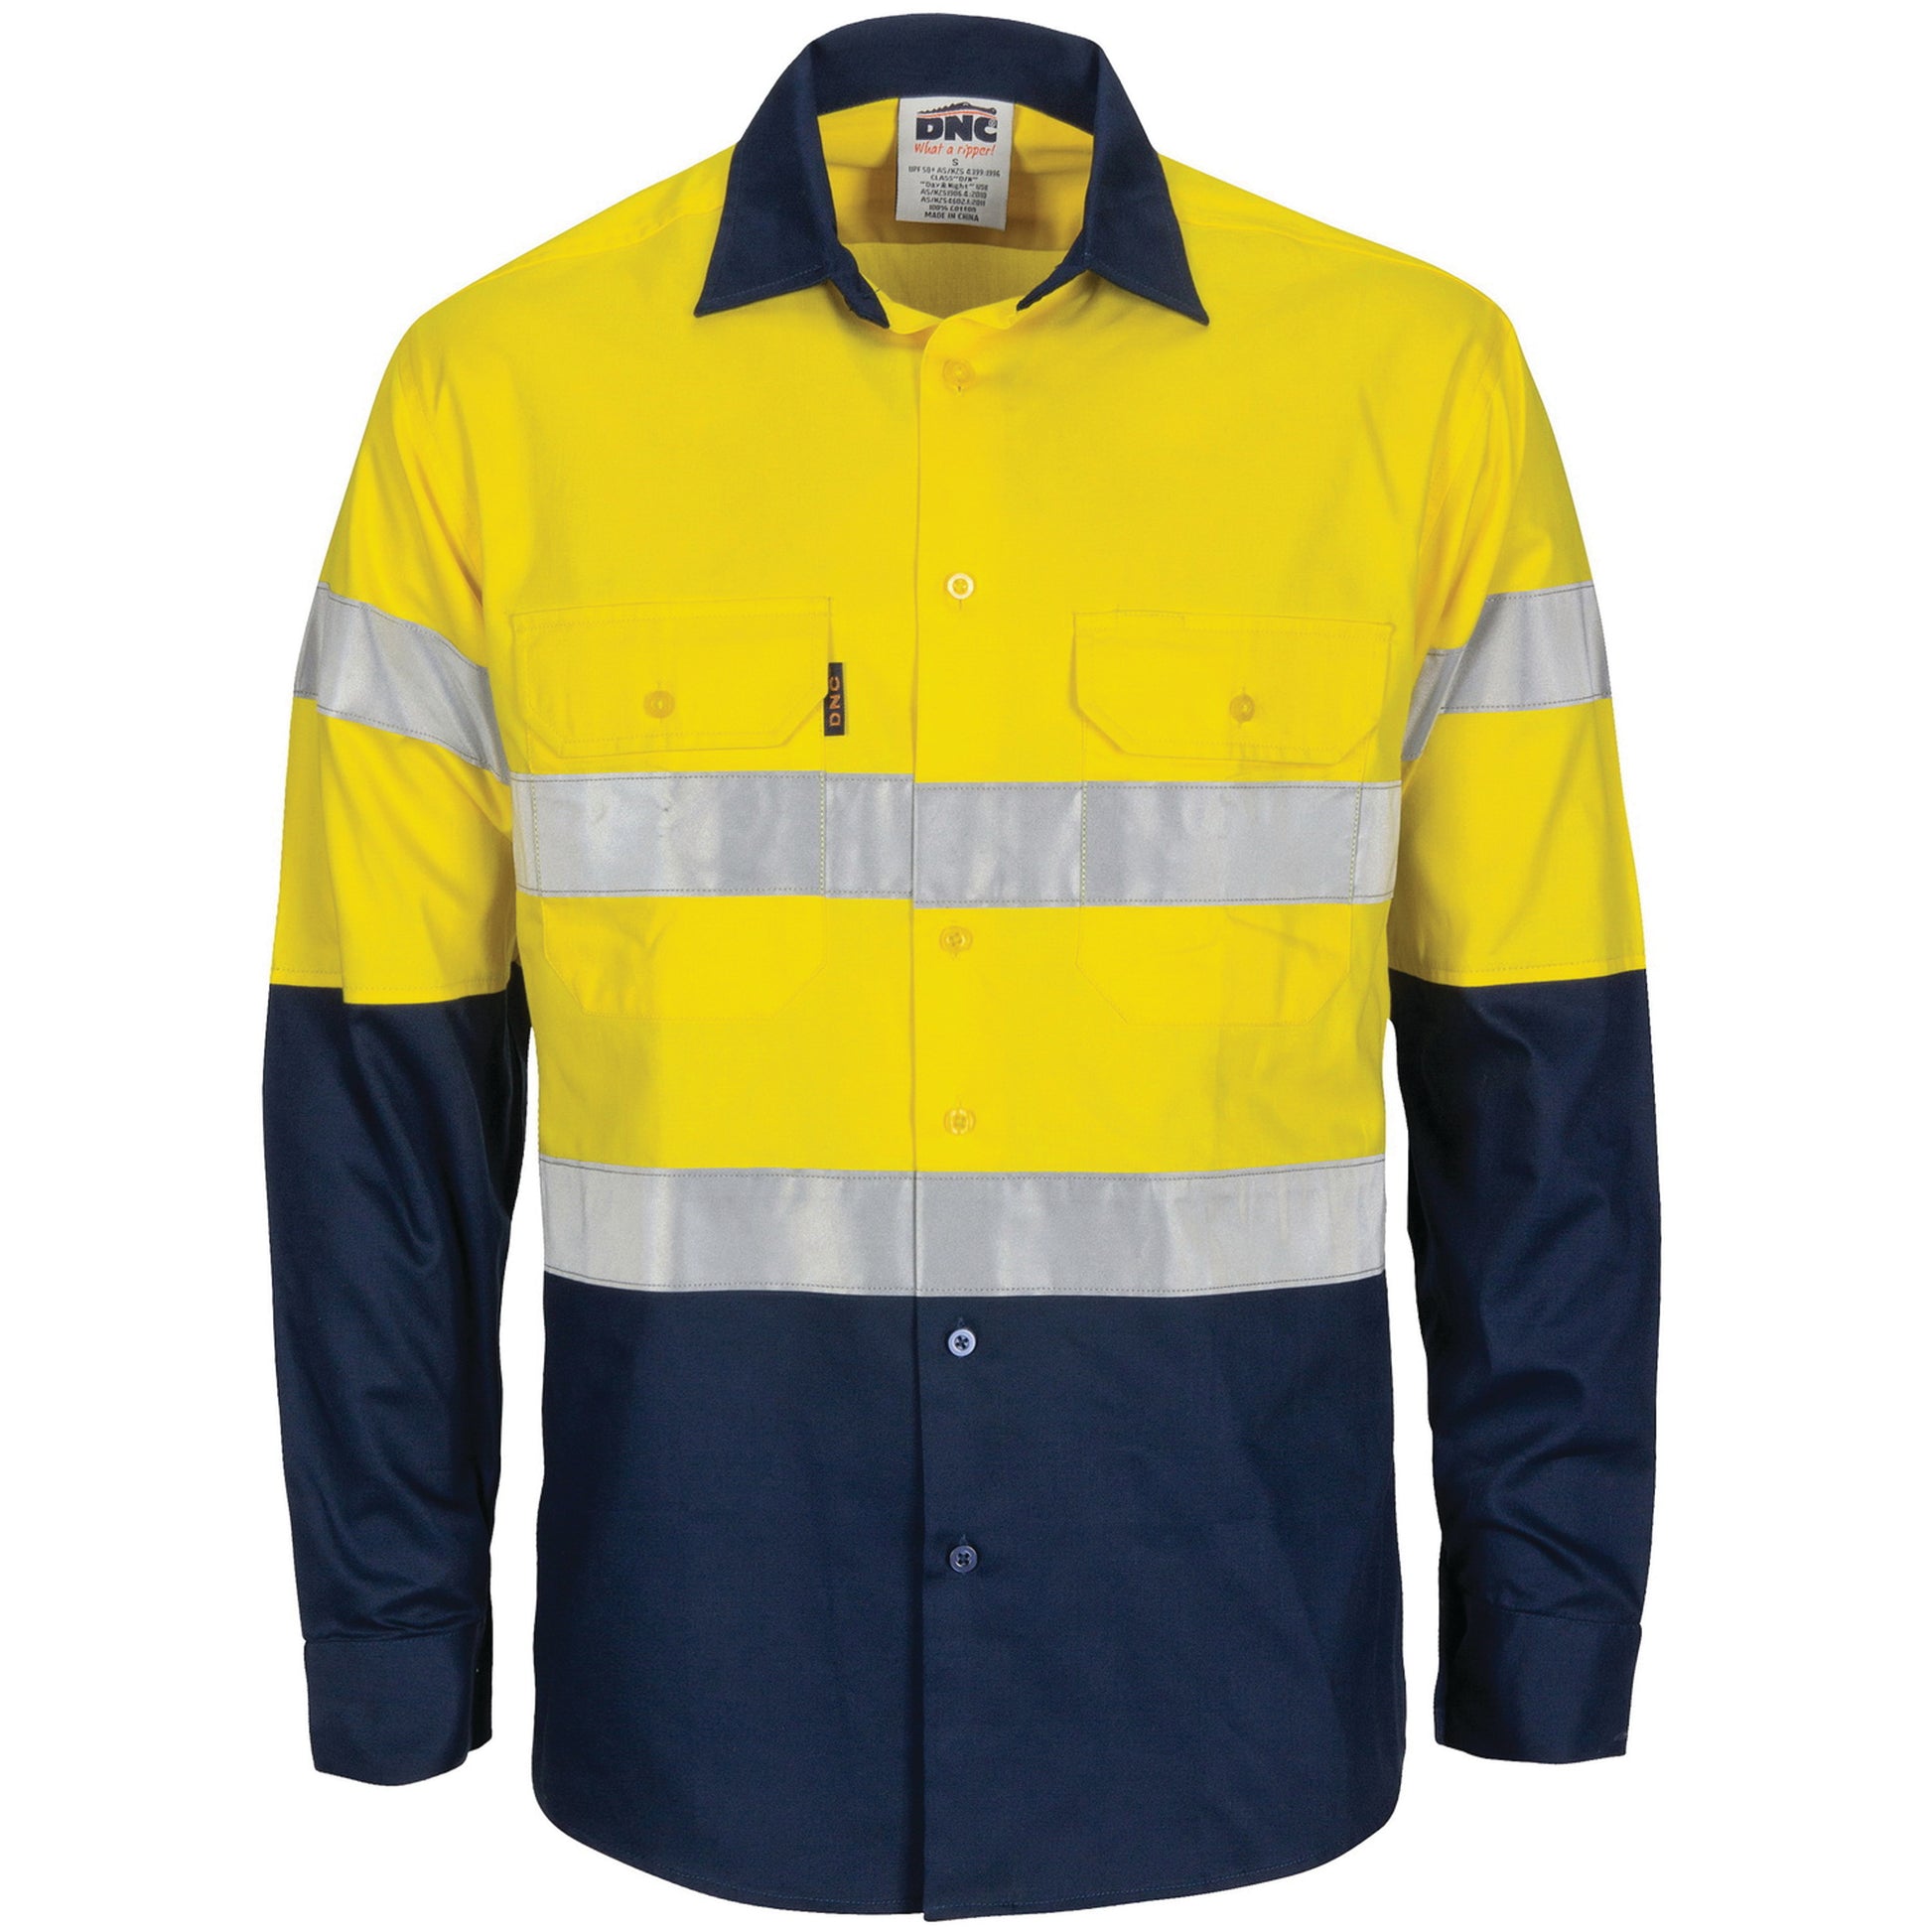 DNC HiVis R/W Cool-Breeze T2 Vertical Vented Cotton Shirt with Gusset Sleeves, Generic R/Tape - Long Sle 3782 - Star Uniforms Australia